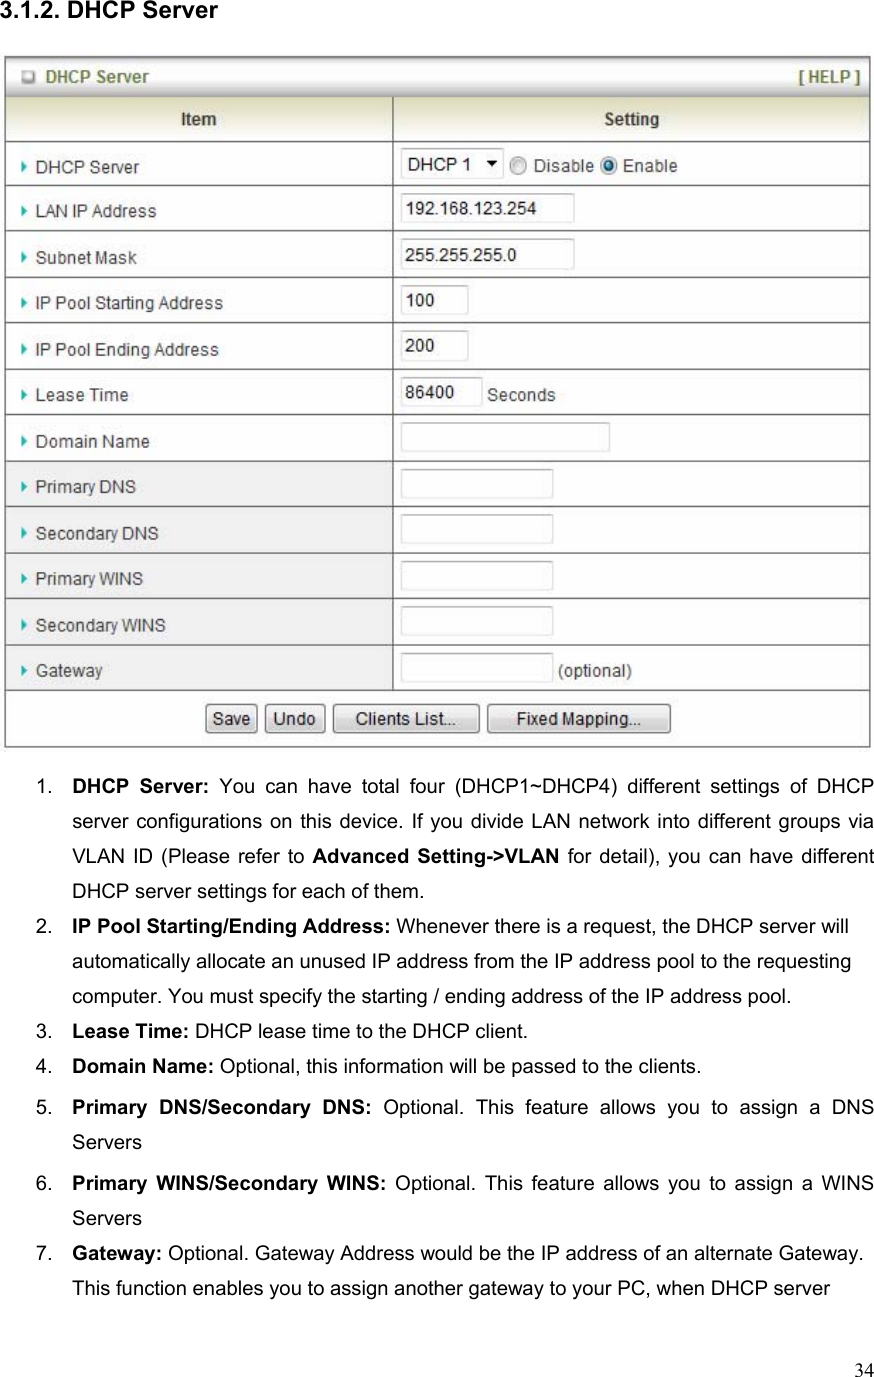  343.1.2. DHCP Server    1.  DHCP Server: You can have total four (DHCP1~DHCP4) different settings of DHCP server configurations on this device. If you divide LAN network into different groups via VLAN ID (Please refer to Advanced Setting-&gt;VLAN for detail), you can have different DHCP server settings for each of them. 2.  IP Pool Starting/Ending Address: Whenever there is a request, the DHCP server will automatically allocate an unused IP address from the IP address pool to the requesting computer. You must specify the starting / ending address of the IP address pool. 3.  Lease Time: DHCP lease time to the DHCP client. 4.  Domain Name: Optional, this information will be passed to the clients. 5.  Primary DNS/Secondary DNS: Optional. This feature allows you to assign a DNS Servers 6.  Primary WINS/Secondary WINS: Optional. This feature allows you to assign a WINS Servers 7.  Gateway: Optional. Gateway Address would be the IP address of an alternate Gateway. This function enables you to assign another gateway to your PC, when DHCP server 